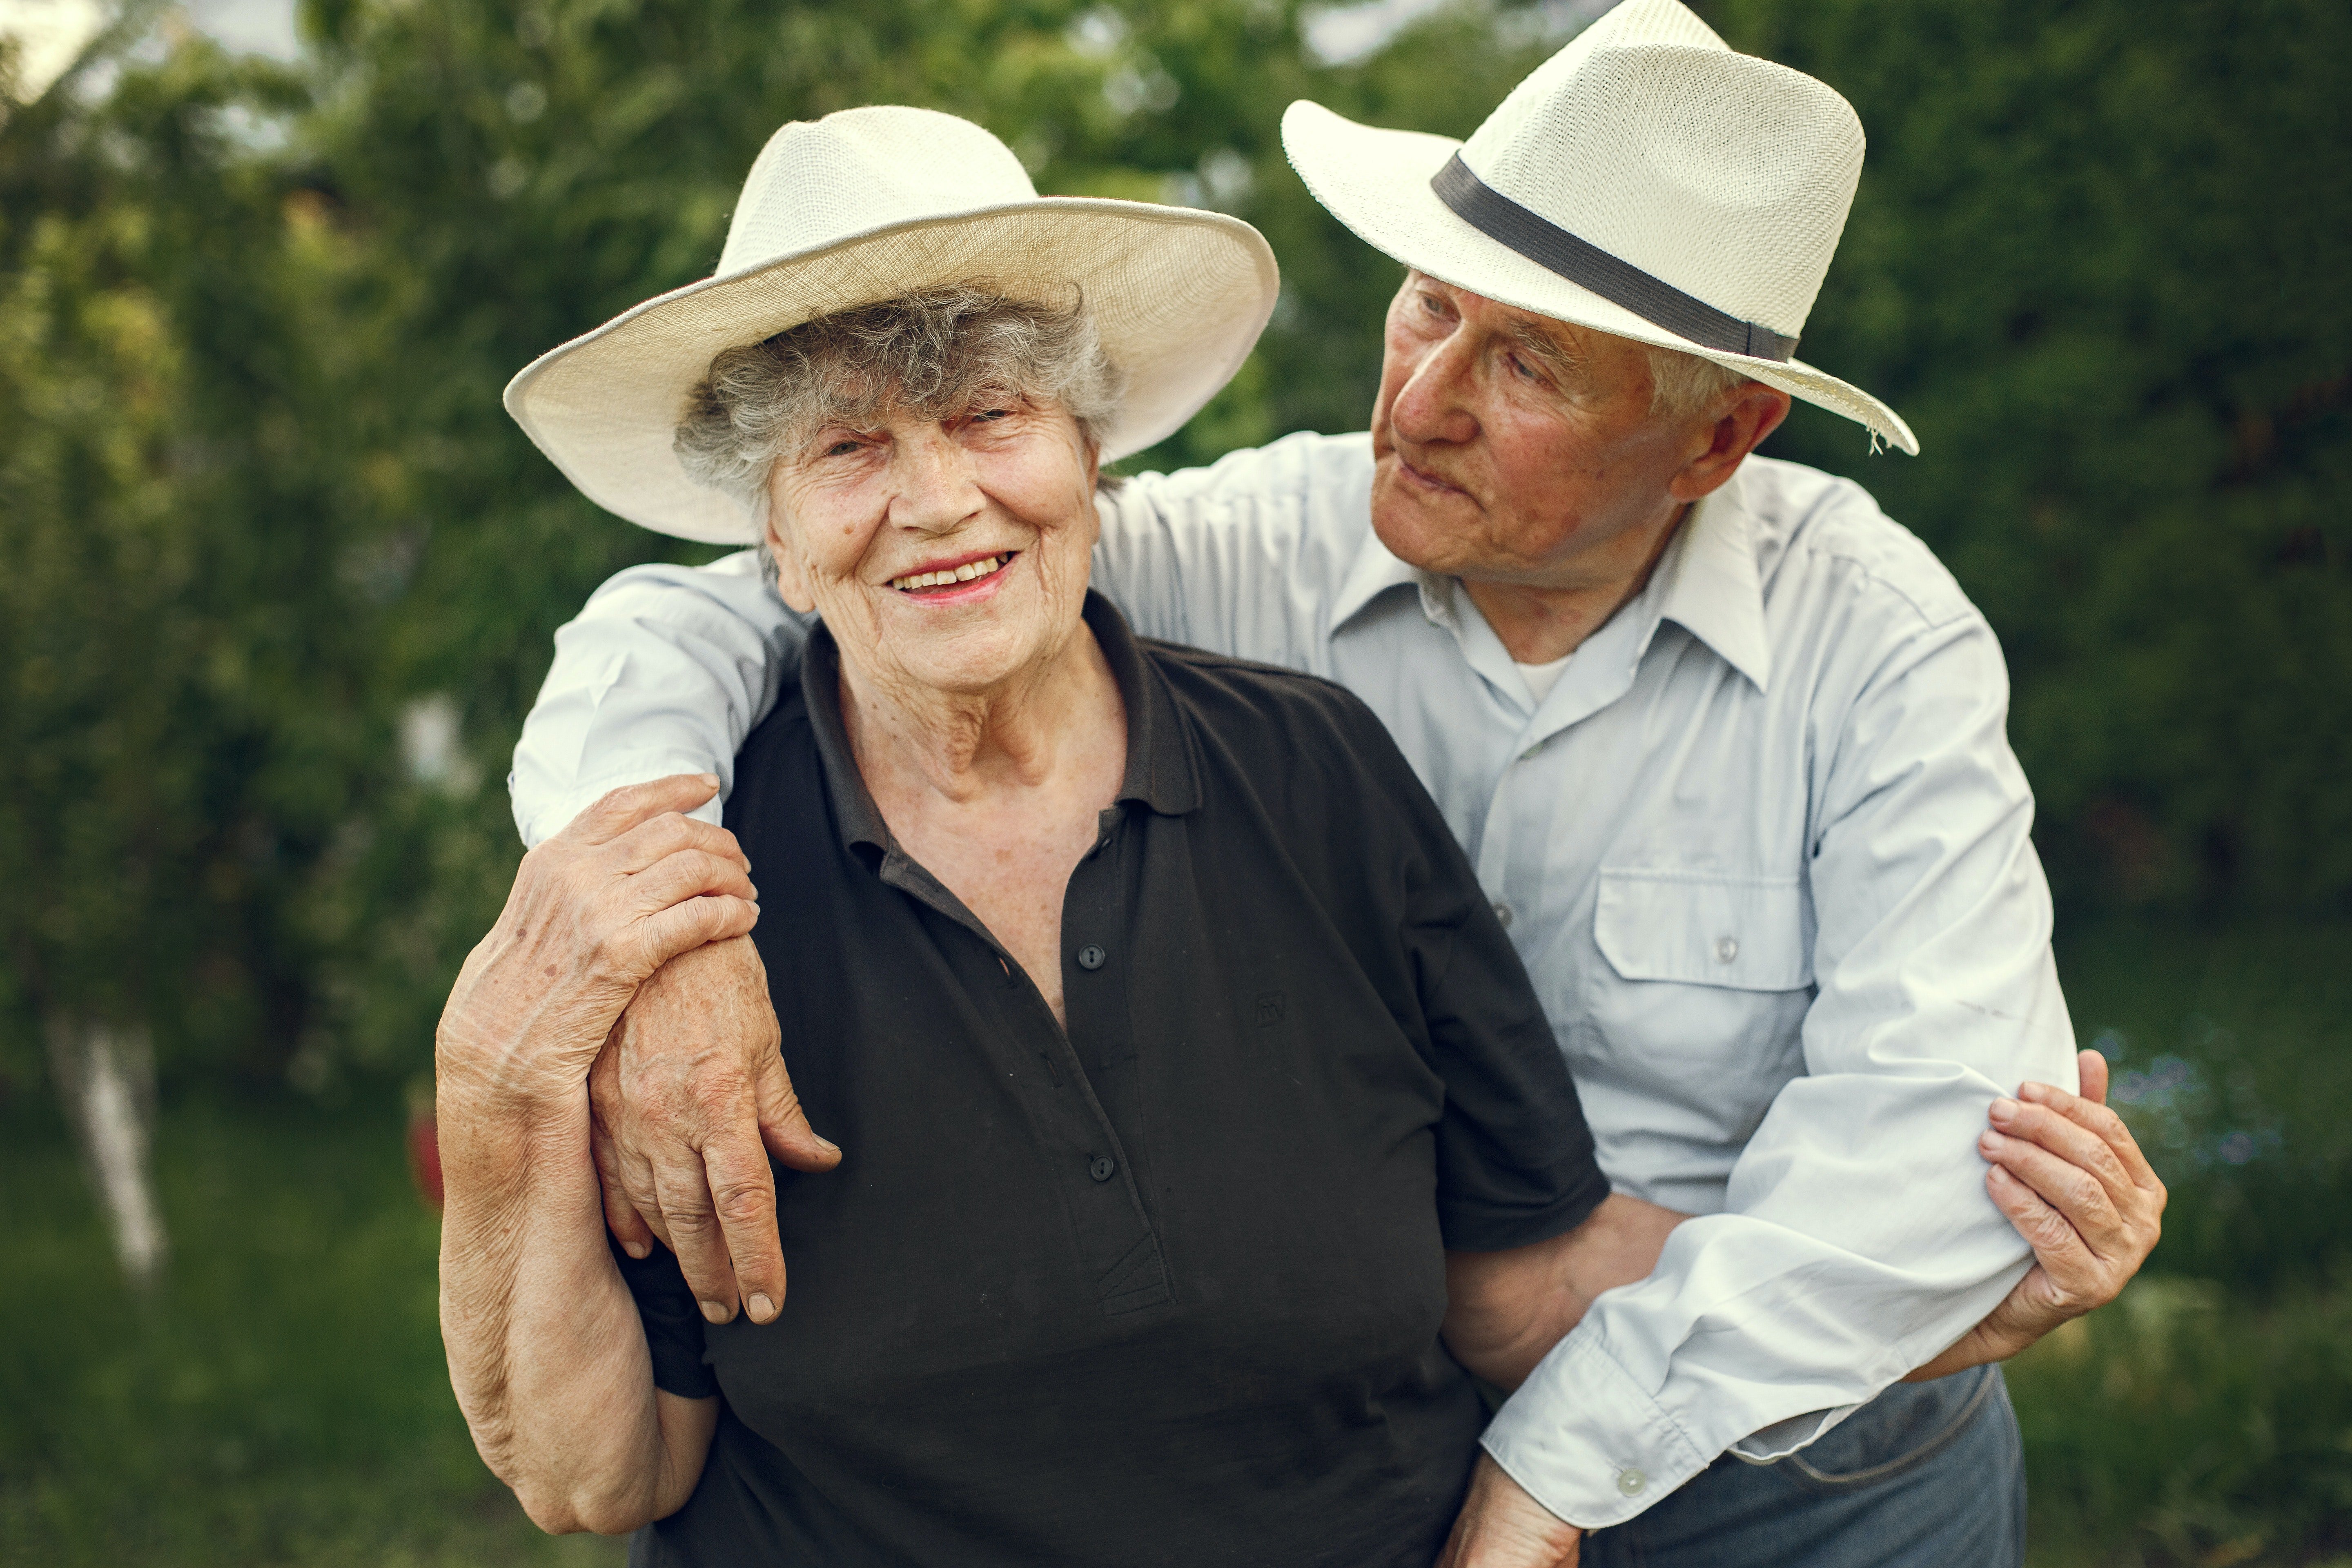 Elderly couple embracing each other. | Source: Pexels/ Gustavo Fring